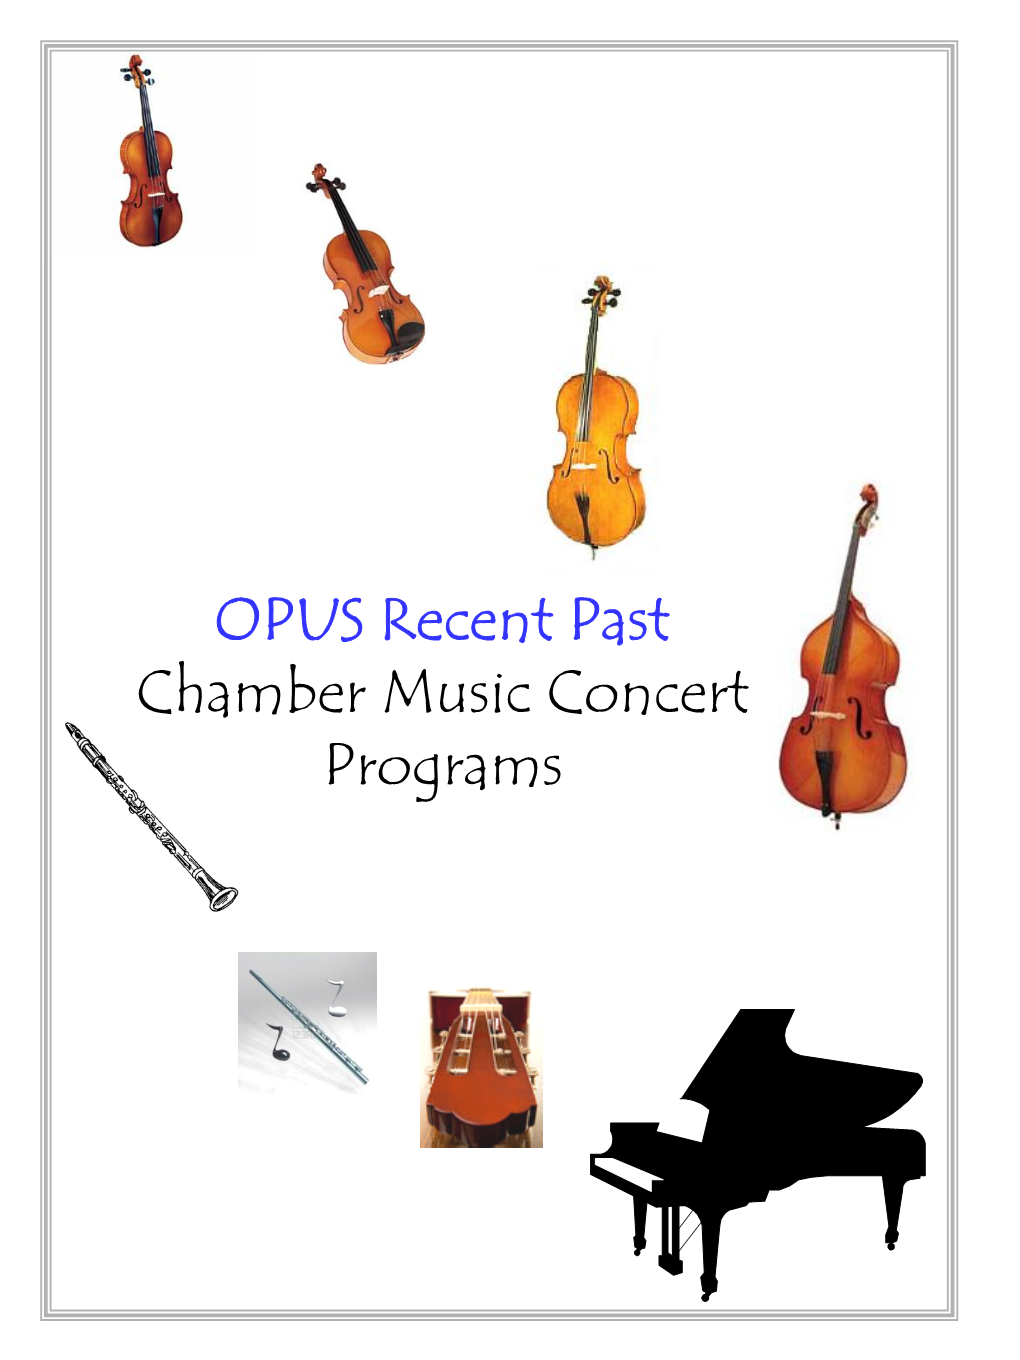 OPUS Recent Past Chamber Music Concert Programs LISTEN to OUR YOUNG ARTISTS a Musical Program Featuring